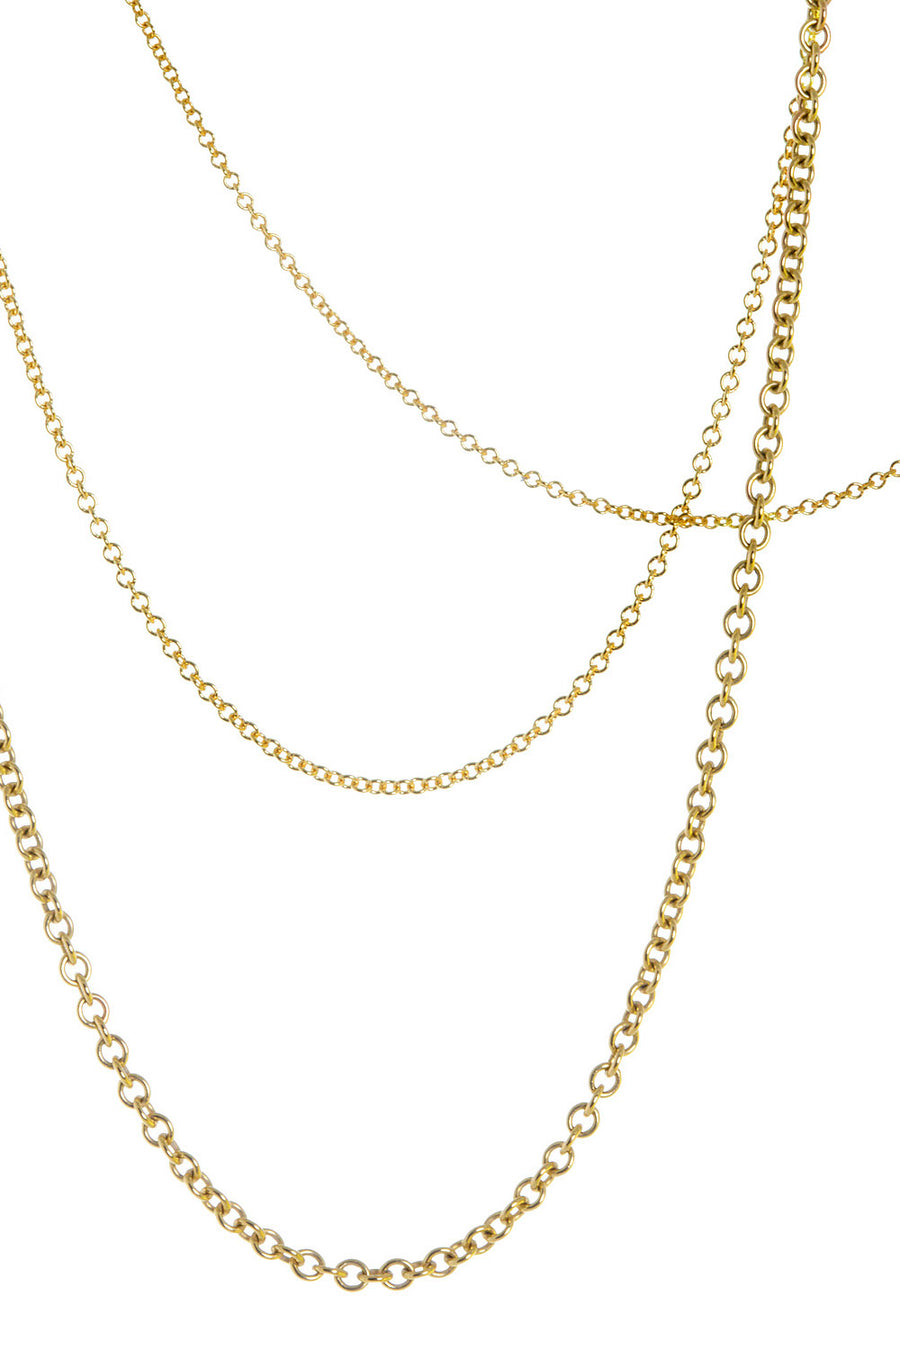 1.3mm Cable Chain Necklace in 14k gold | 20"